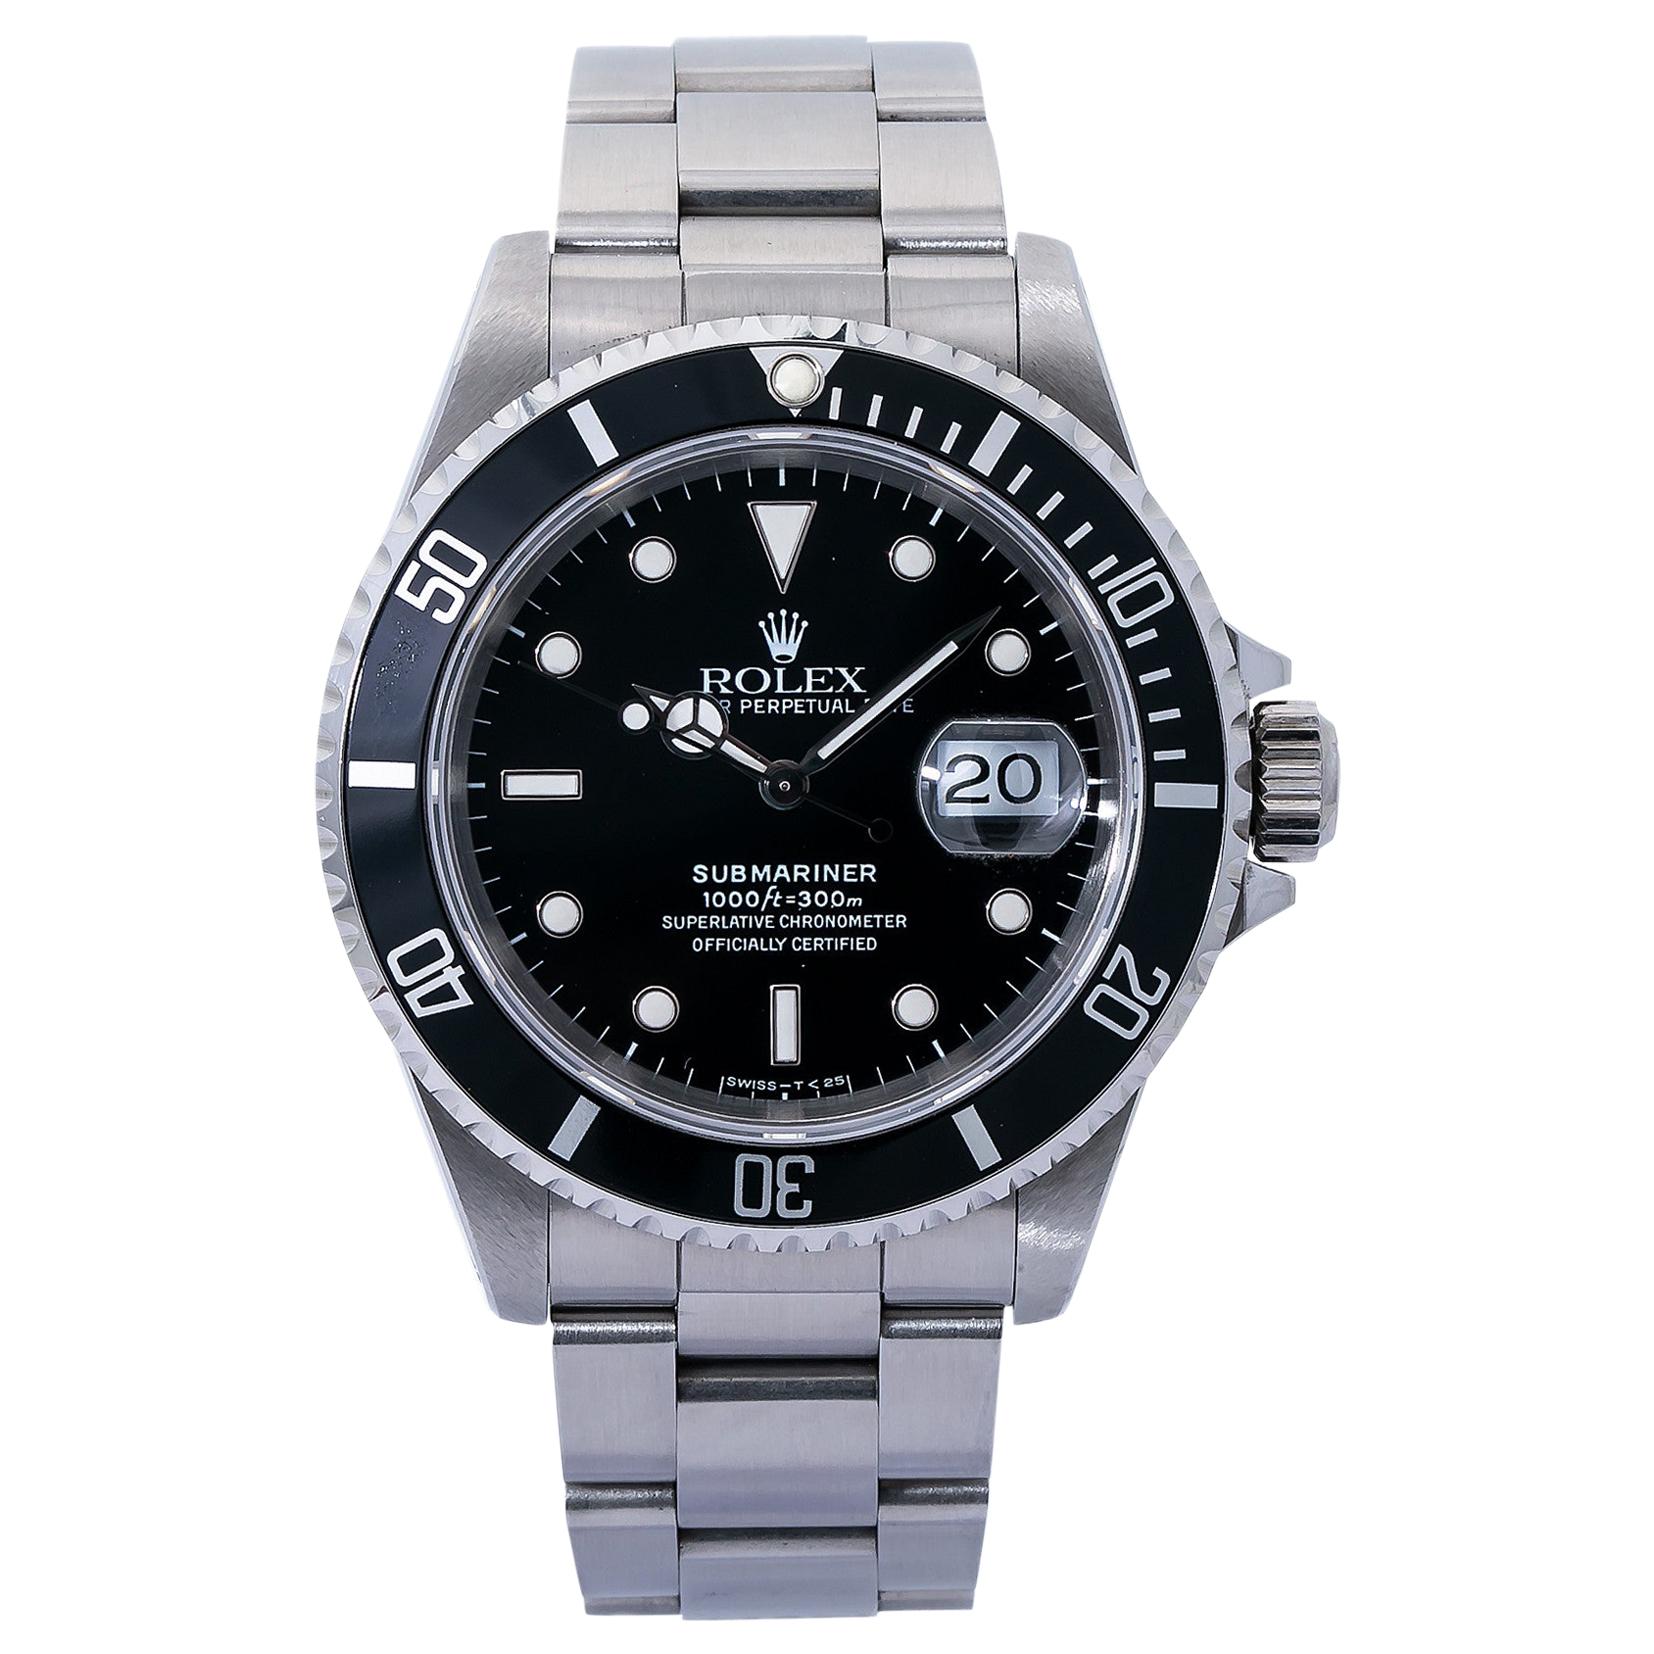 Rolex Submariner Unpolished 16610 Commodores Cup Race Winner, 1992